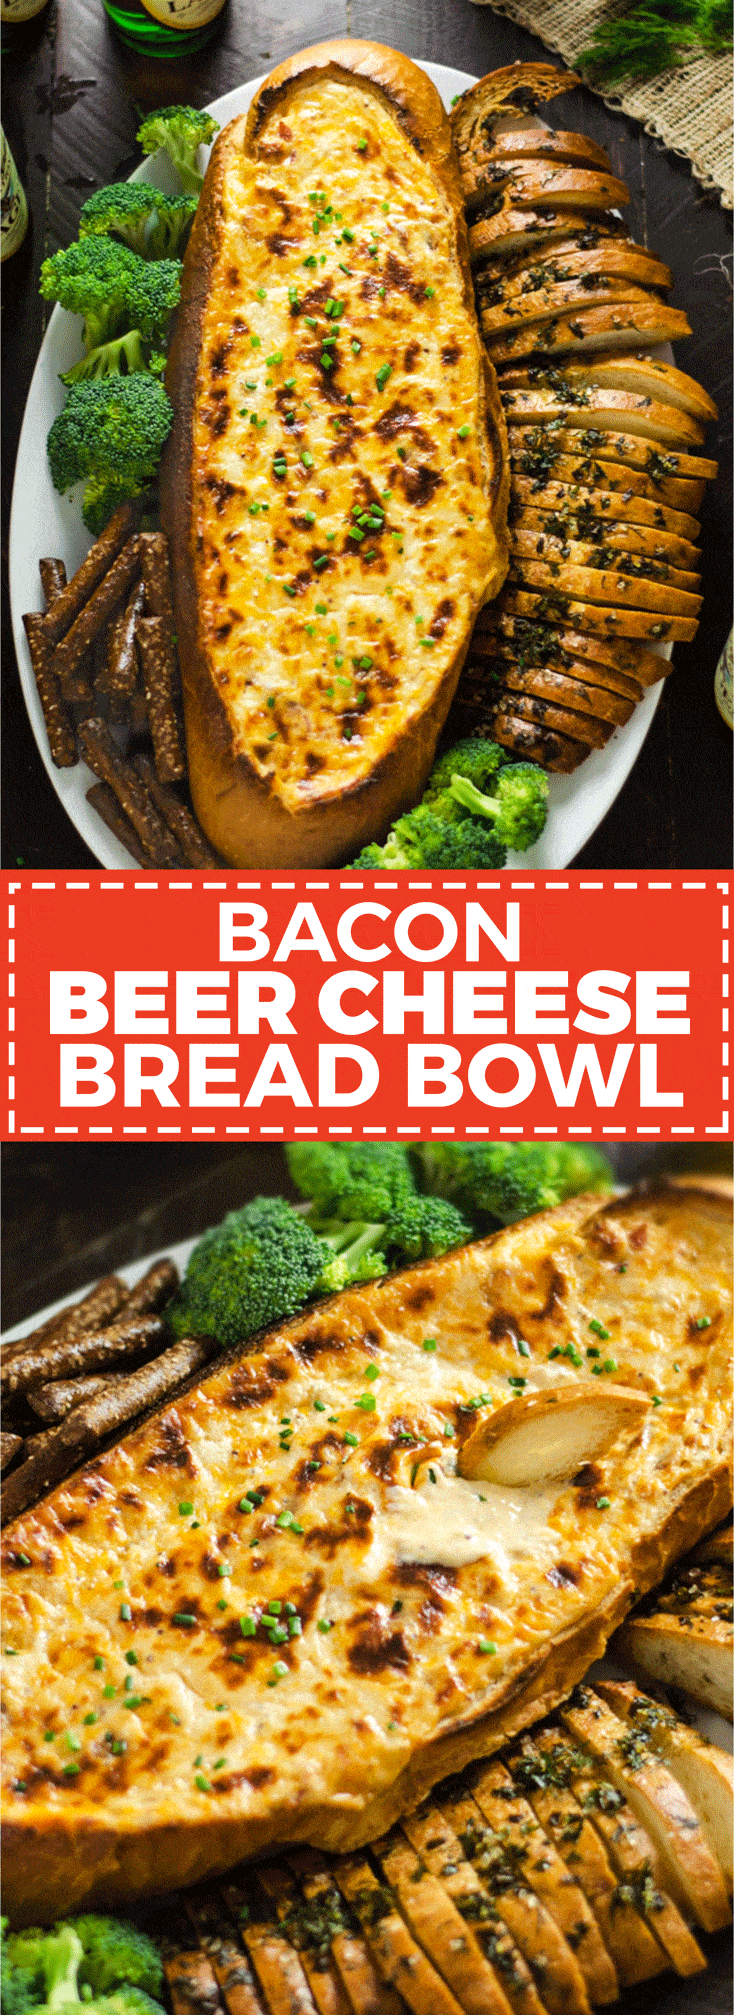 Bacon Beer Cheese Bread Bowl. A flavorful, fondue-like beer cheese studded with crumbled bacon is baked inside of Italian bread and served with garlic and herb crispy bread slices. It's the perfect easy-to-make snack for your Super Bowl party. | hostthetoast.com